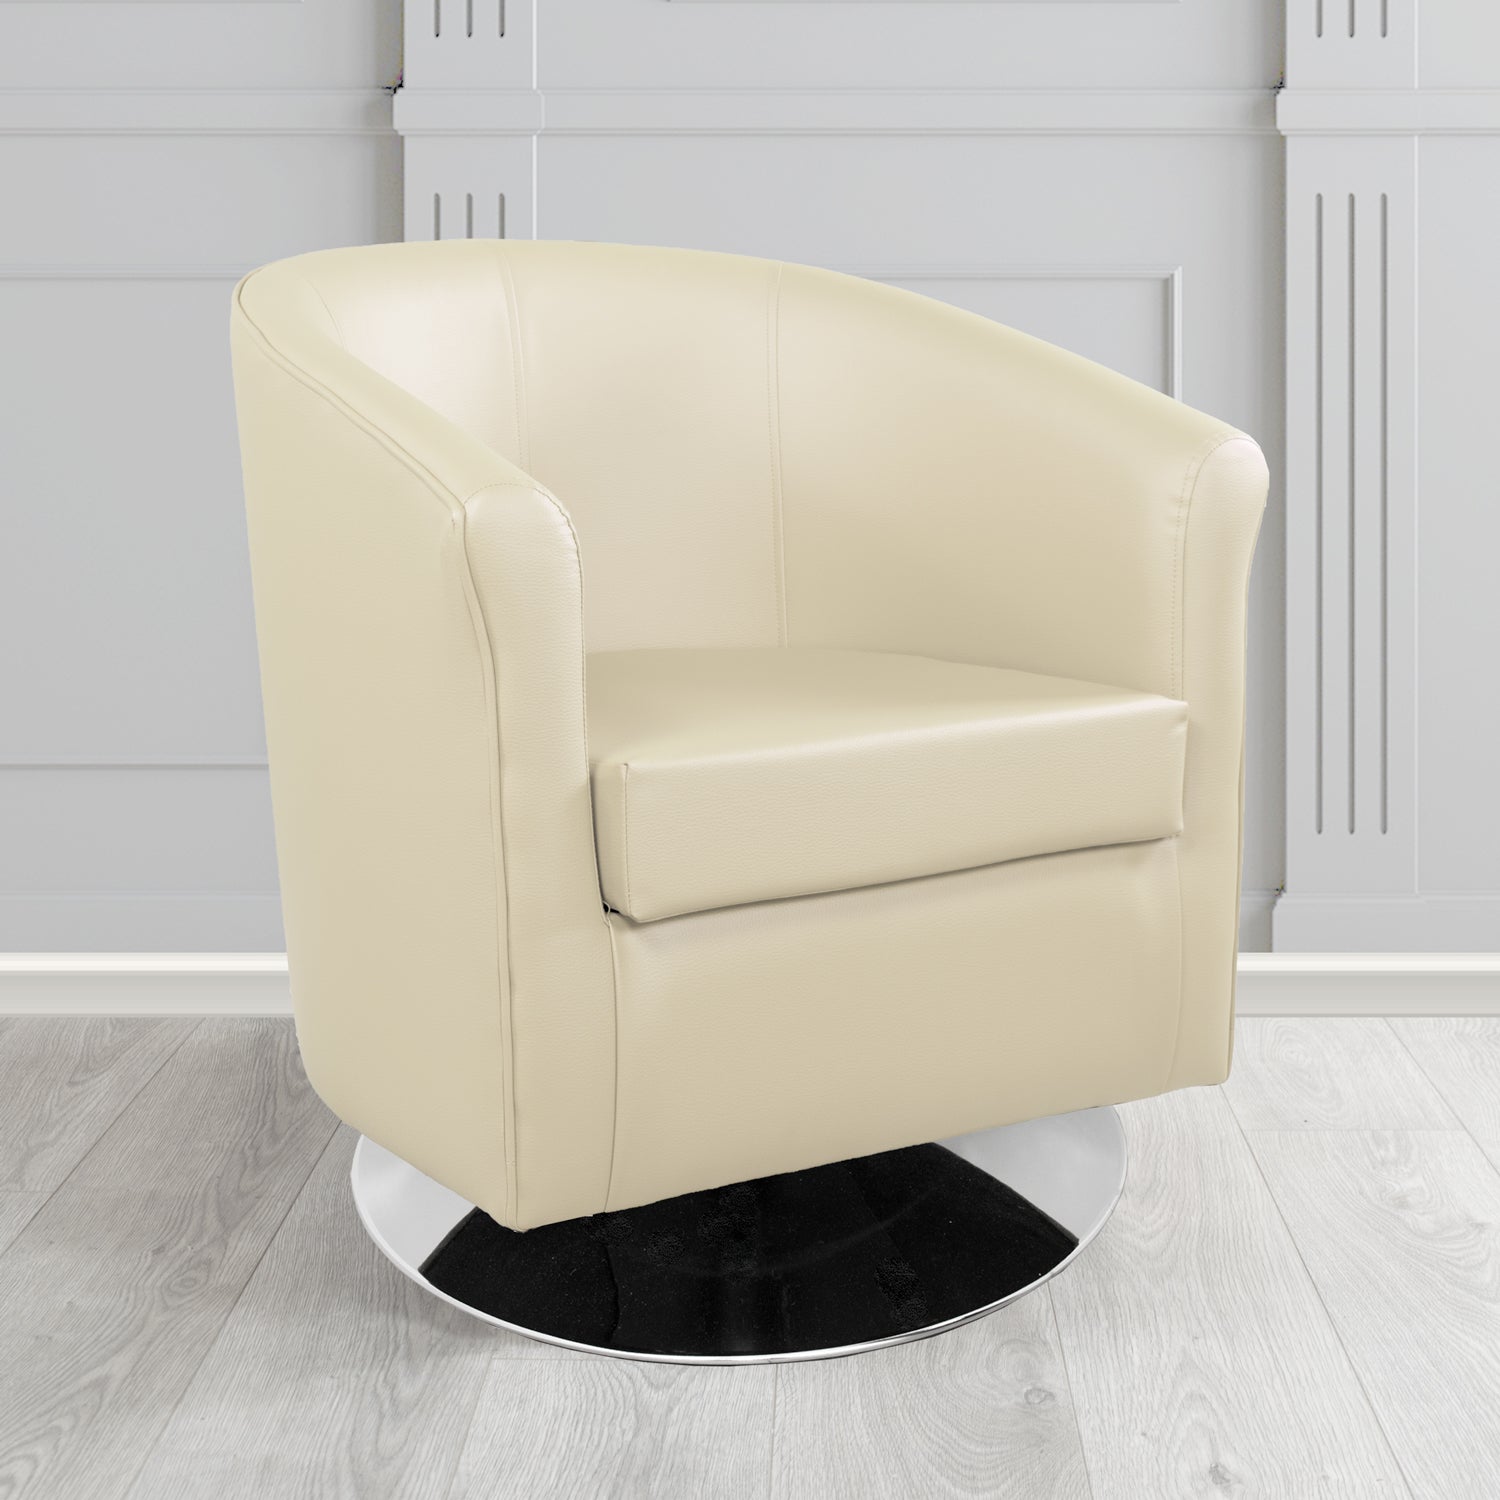 Tuscany Swivel Tub Chair in Madrid Cream Faux Leather - The Tub Chair Shop